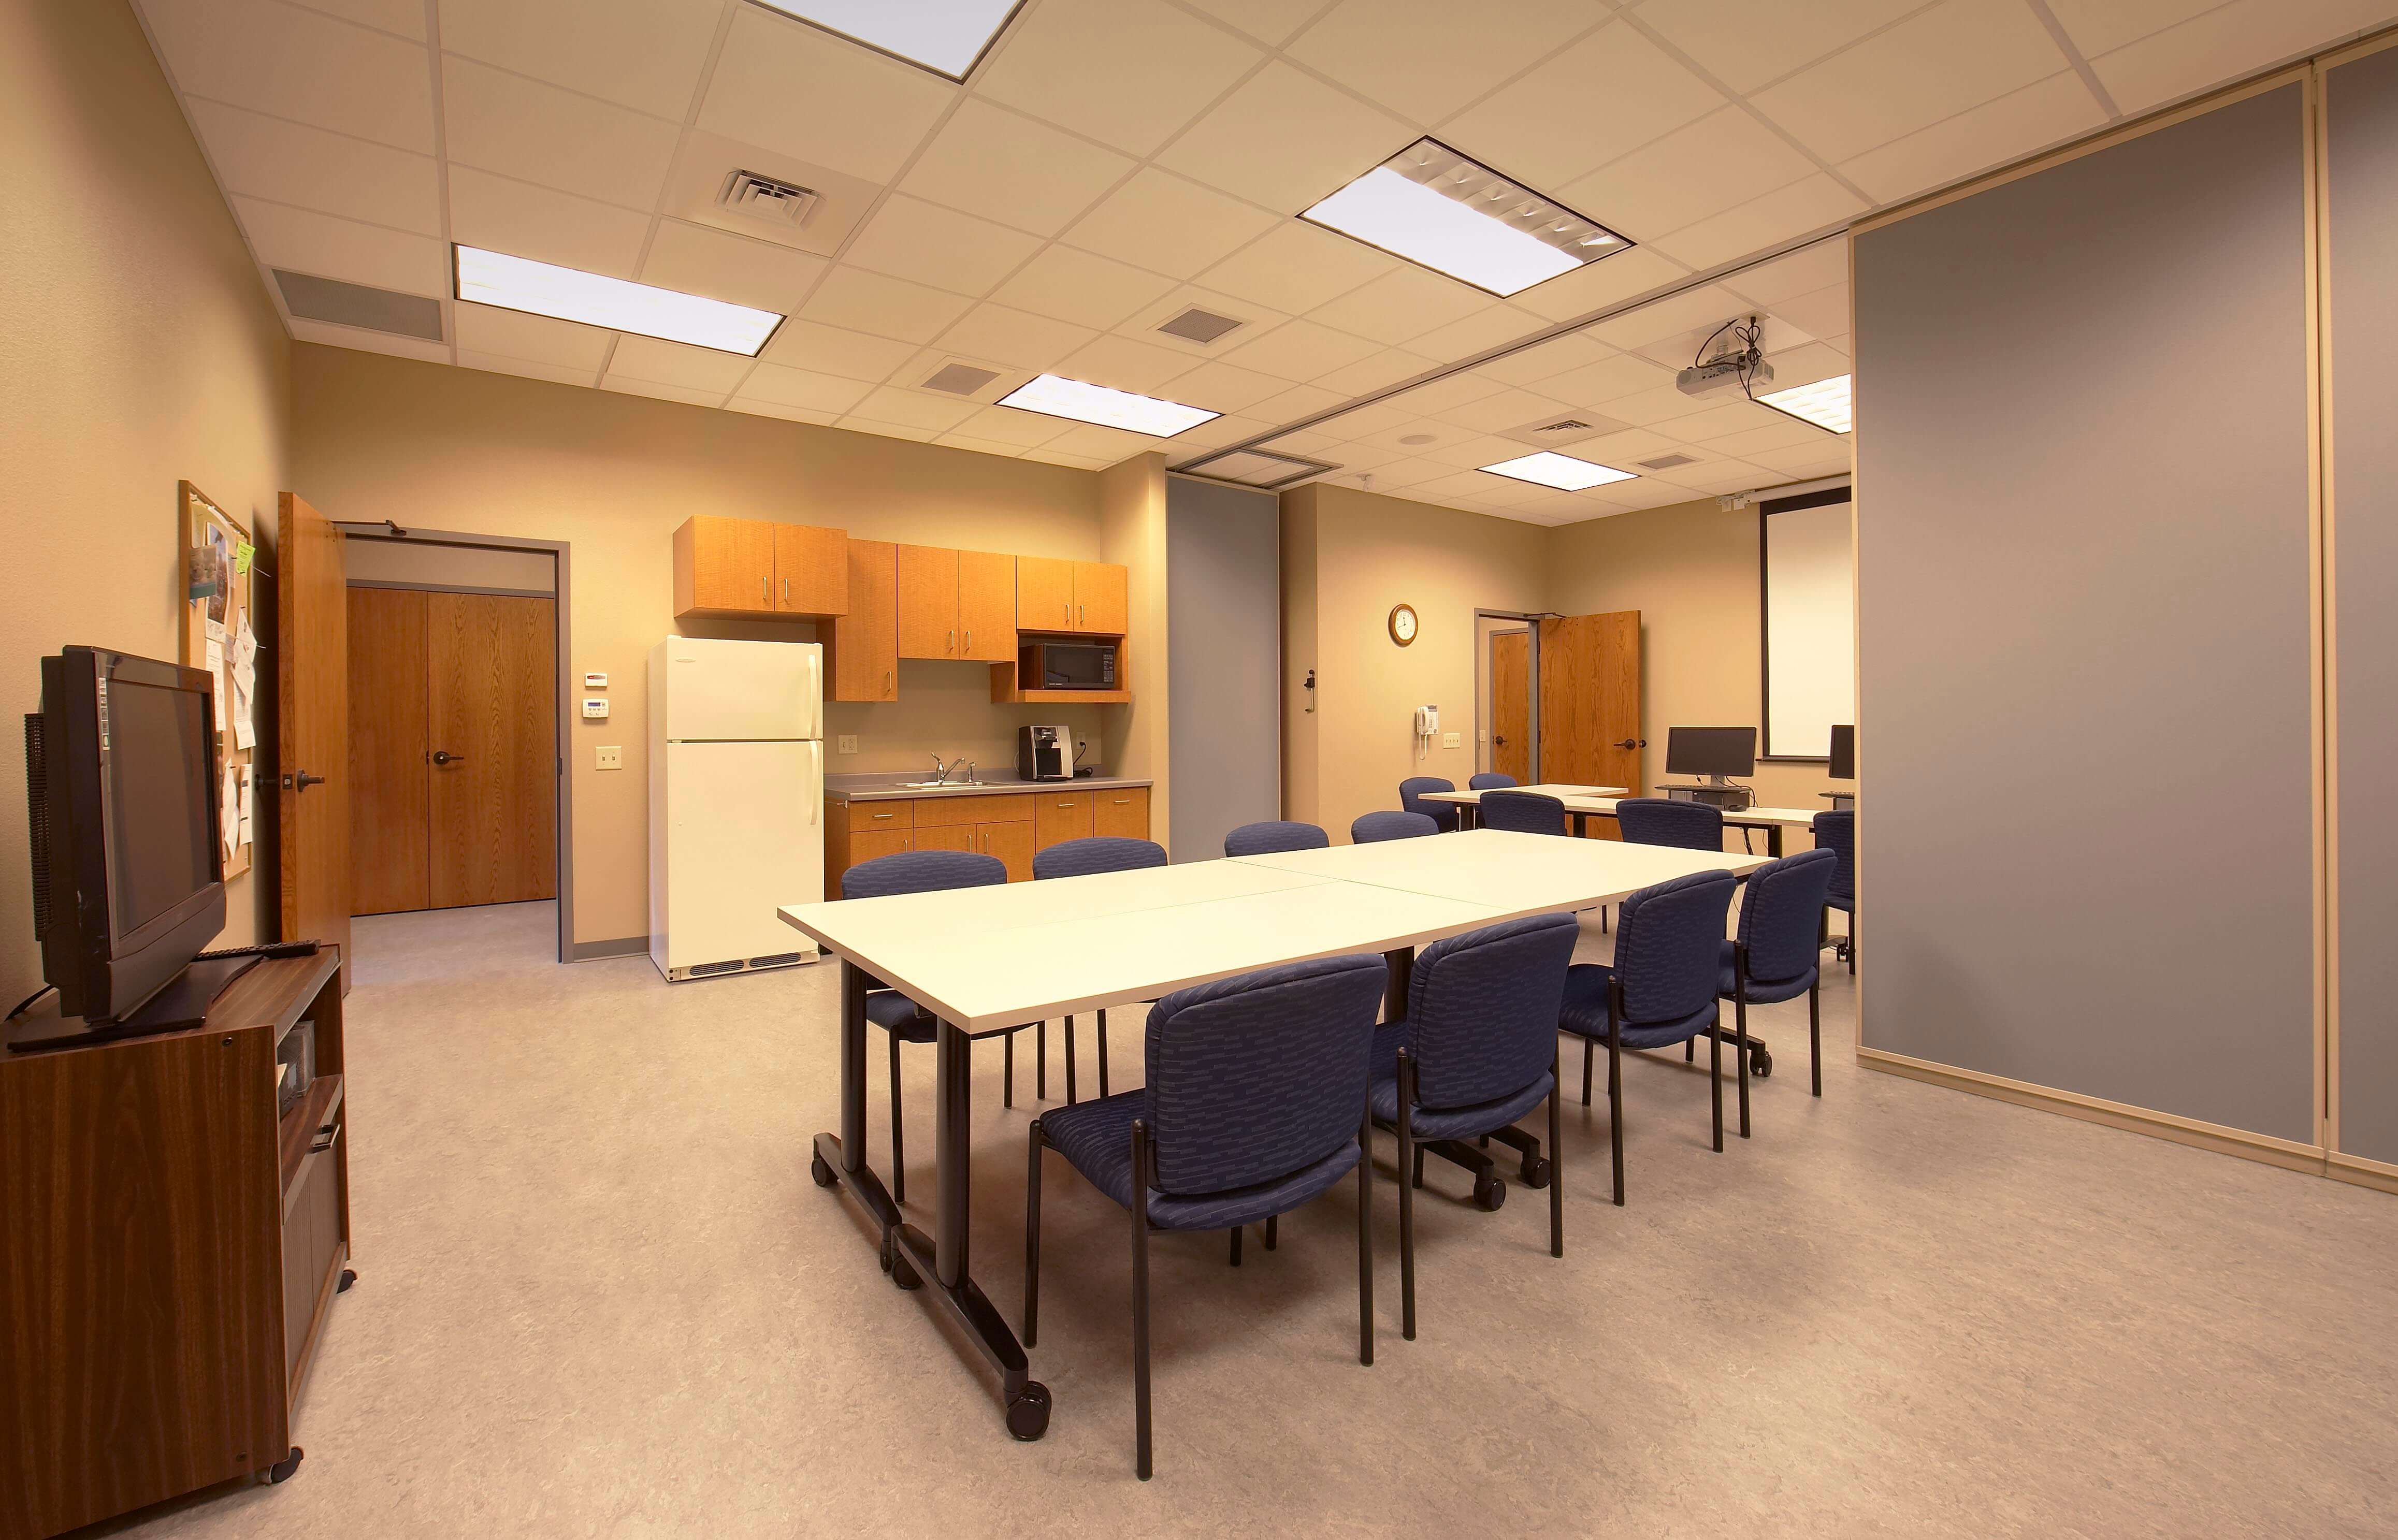 Community room at Cleveland State Bank